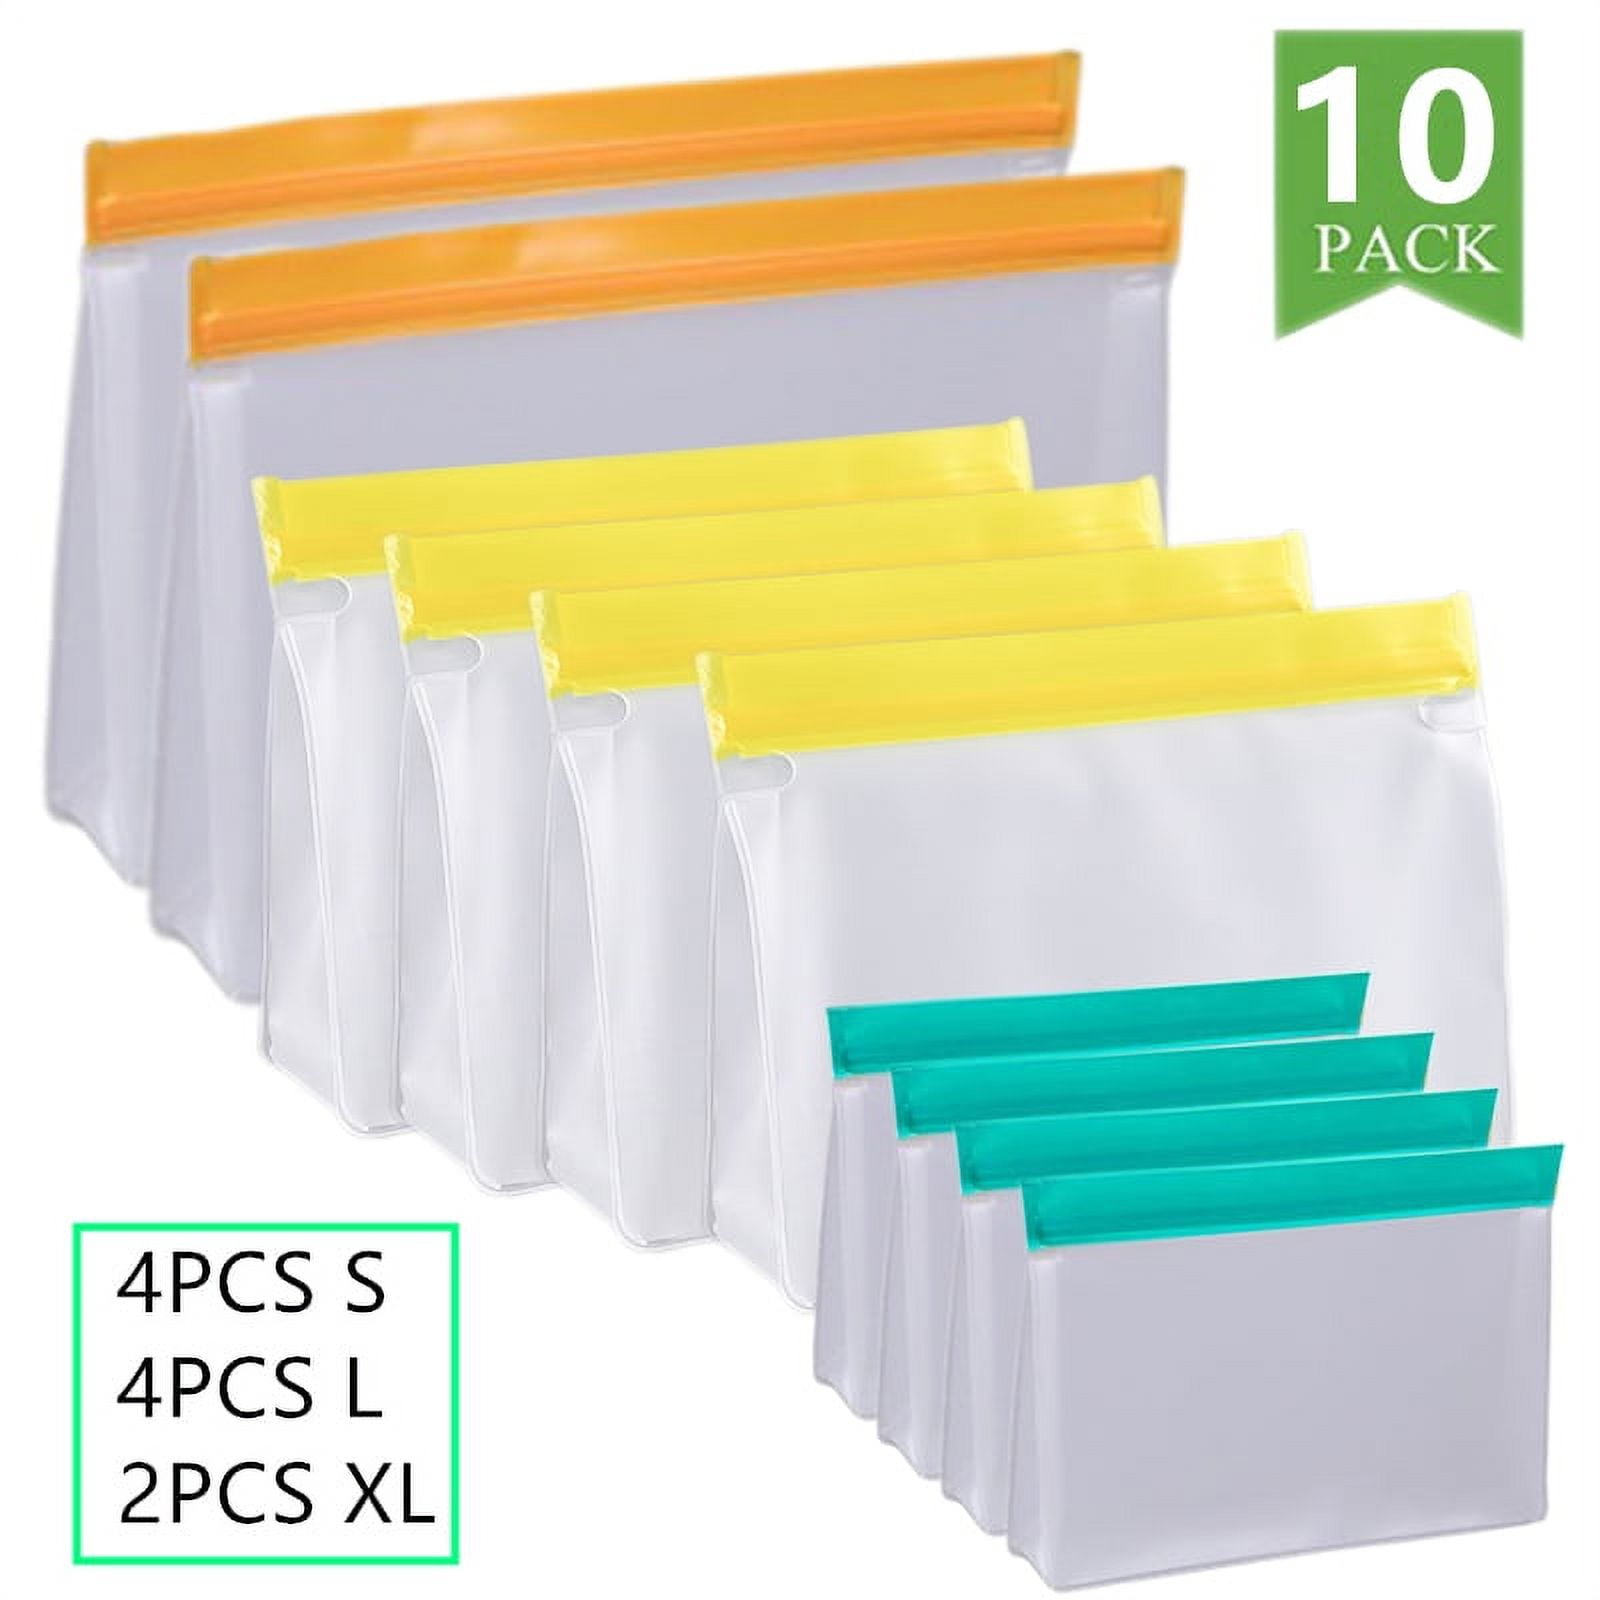 12 XL Frosted Resealable Bags Ziplock Seal Plastic Bag for 